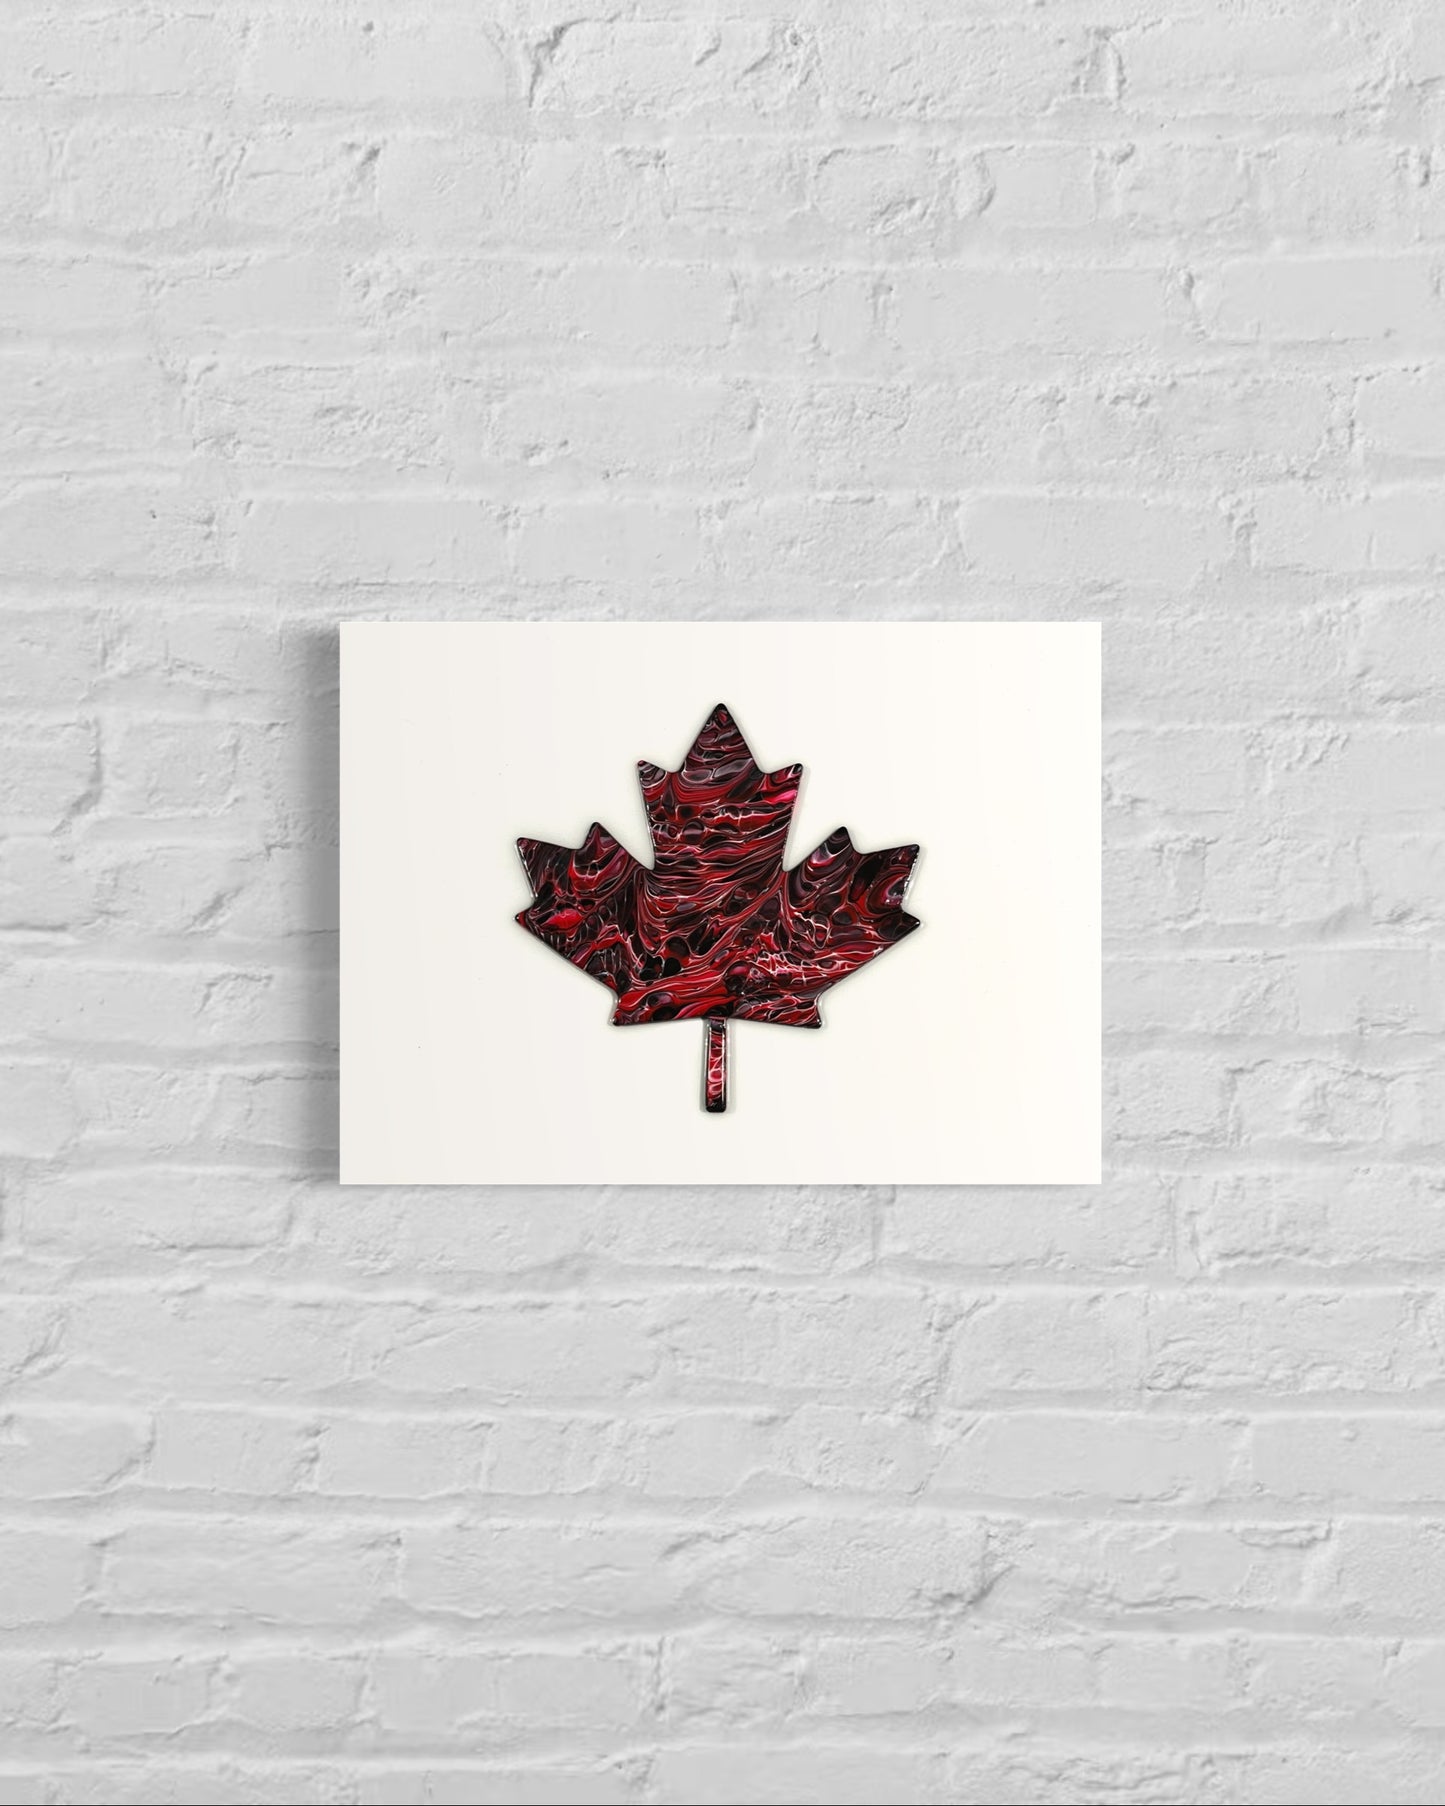 Black and white abstract cell art maple leaf on a white background. This image is of a stretched canvas print.